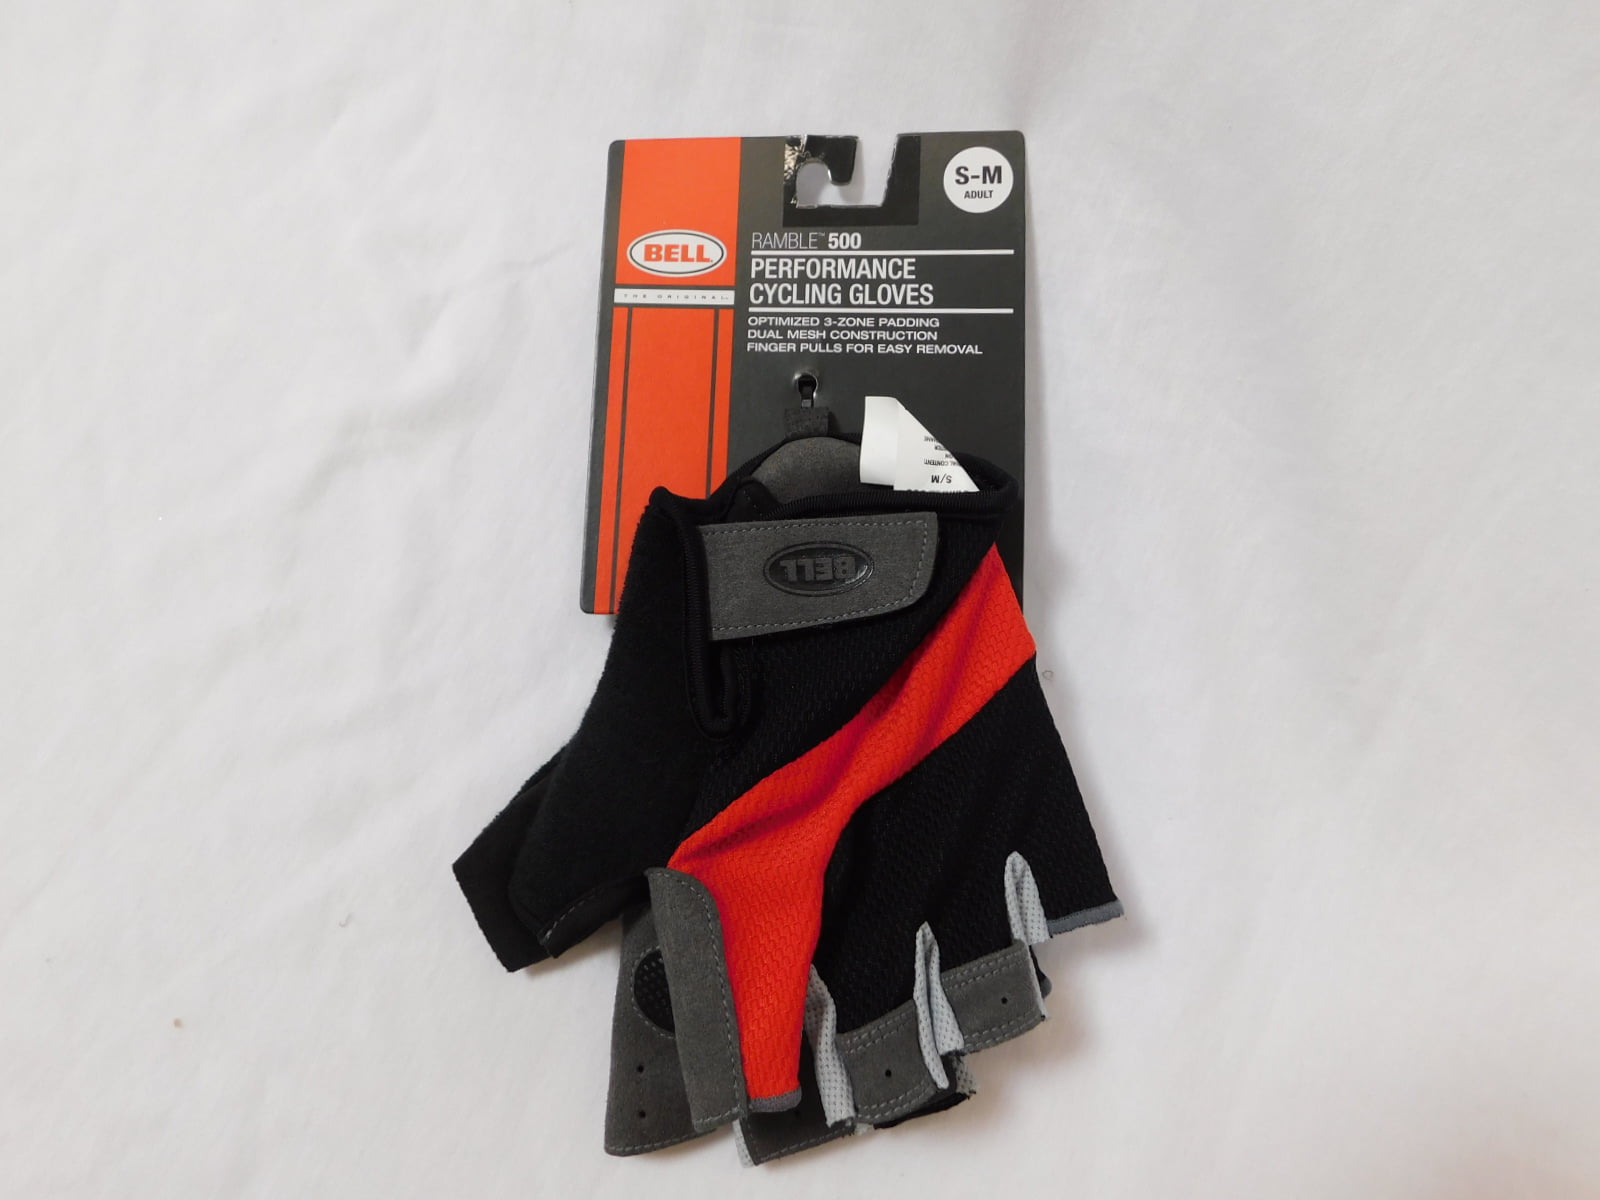 New Bell Ramble 500 Performance Cycling Gloves Size S-M 